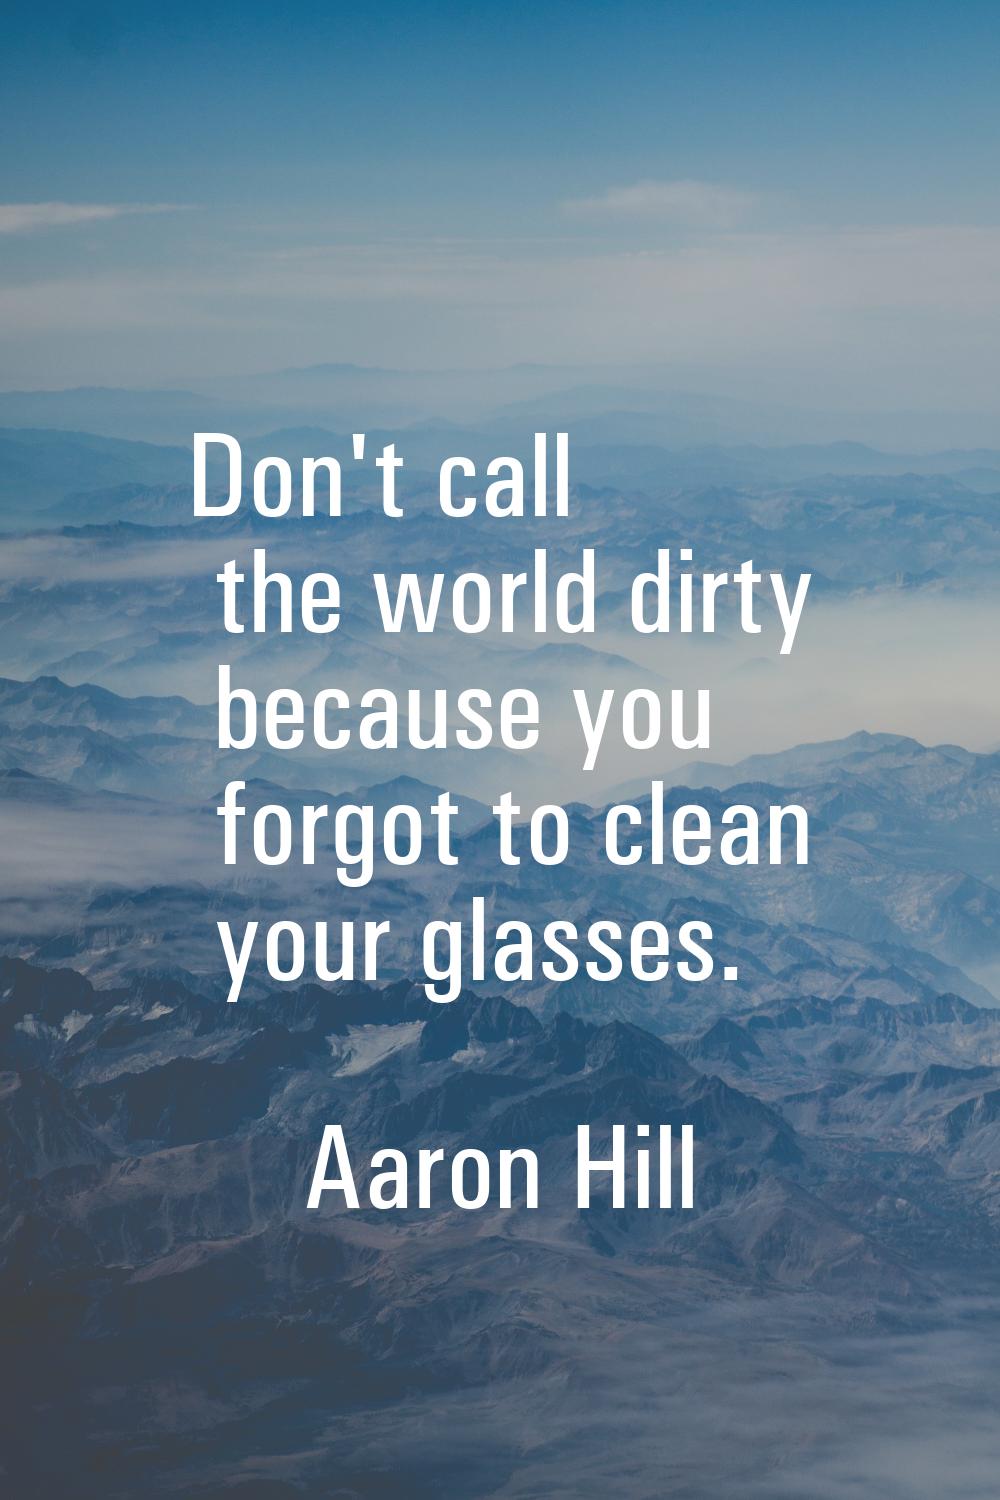 Don't call the world dirty because you forgot to clean your glasses.